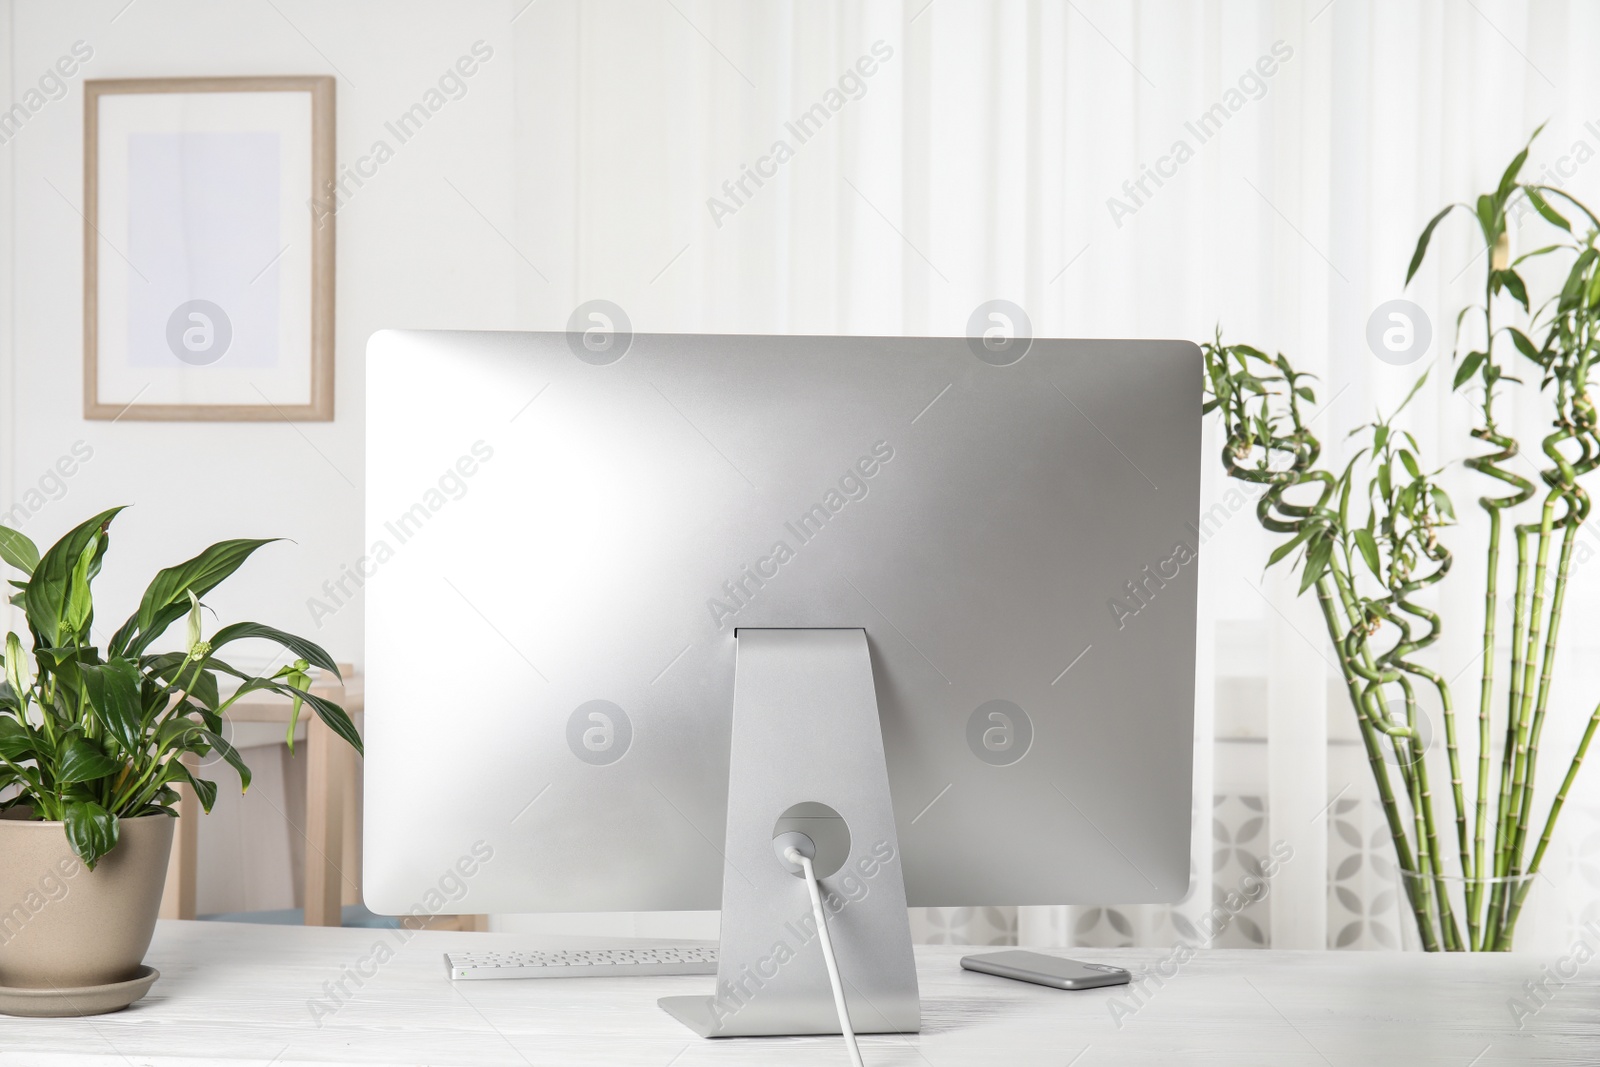 Photo of Office interior with houseplants and computer monitor on table